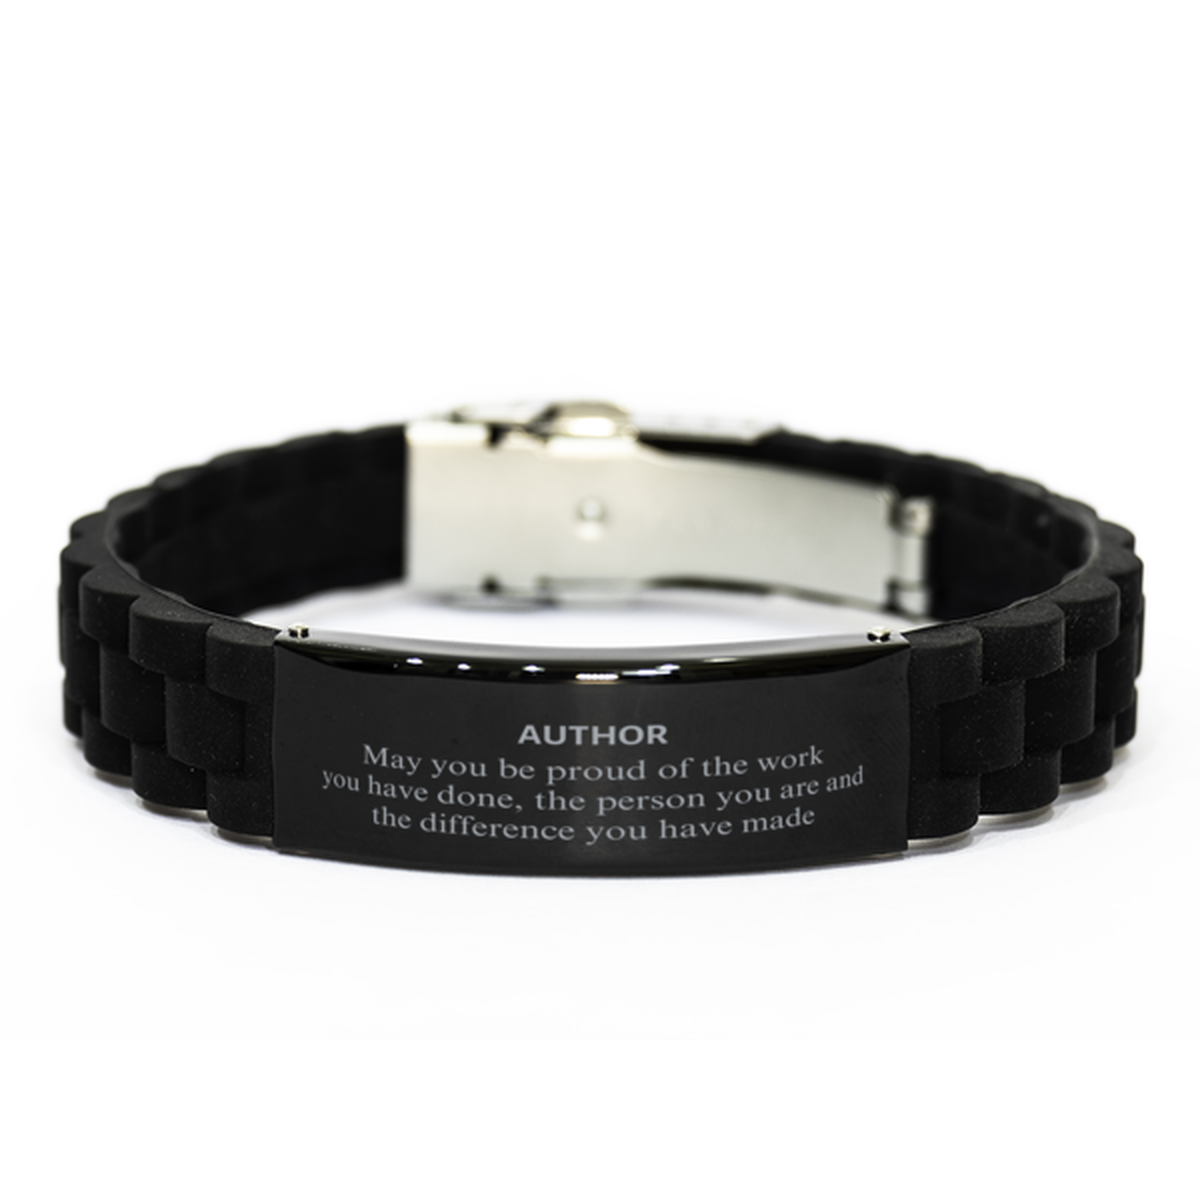 Author May you be proud of the work you have done, Retirement Author Black Glidelock Clasp Bracelet for Colleague Appreciation Gifts Amazing for Author